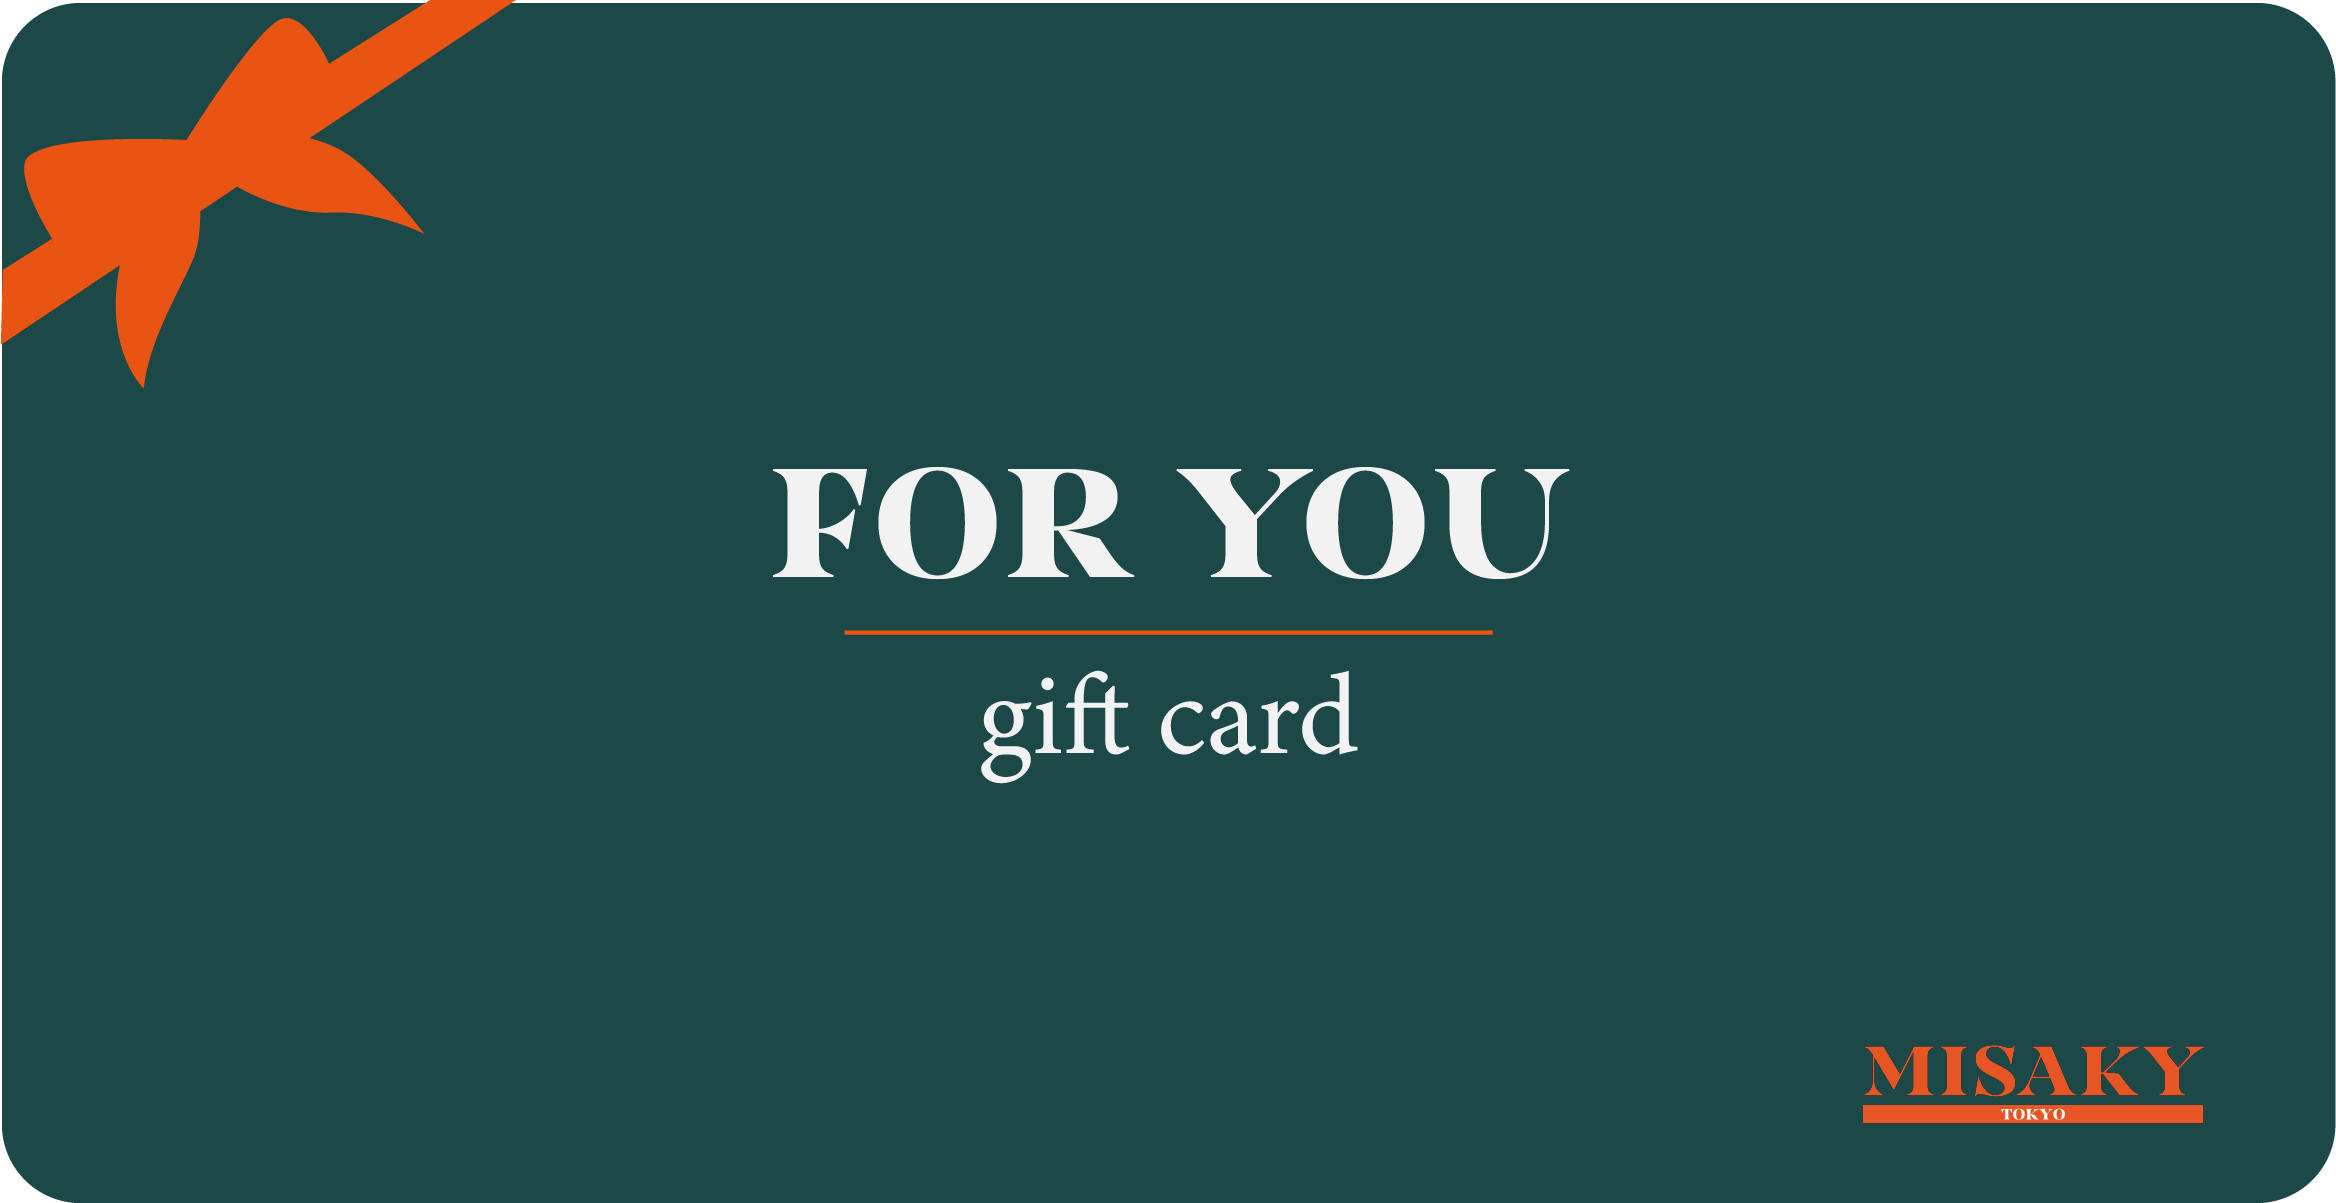 An image of a gift card